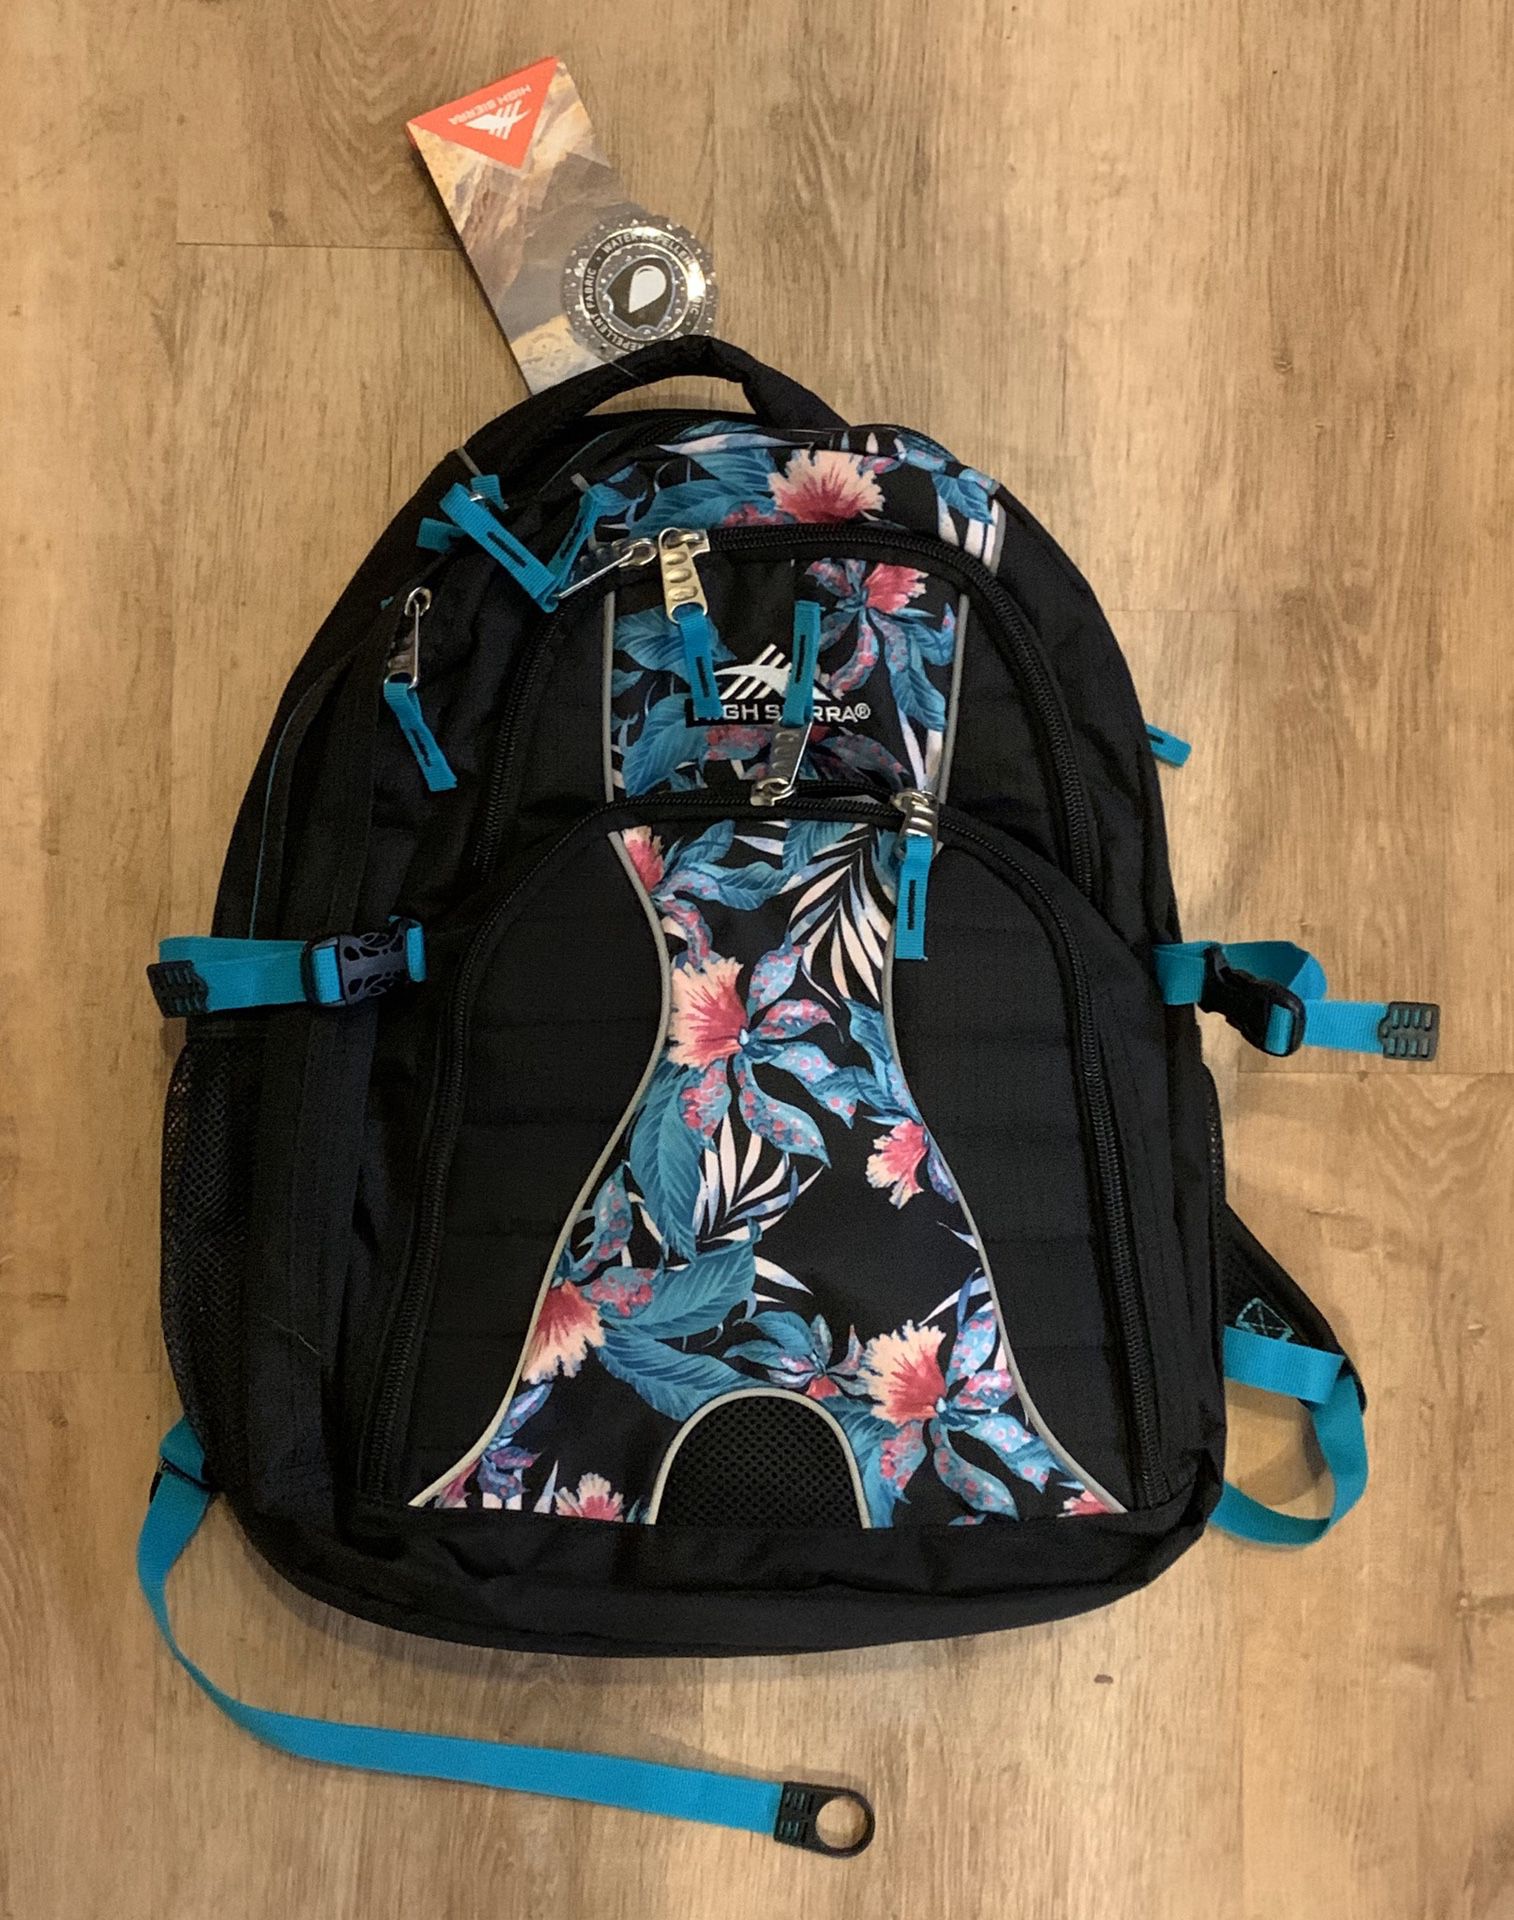 Brand new Swerve Laptop Backpack by High Sierra